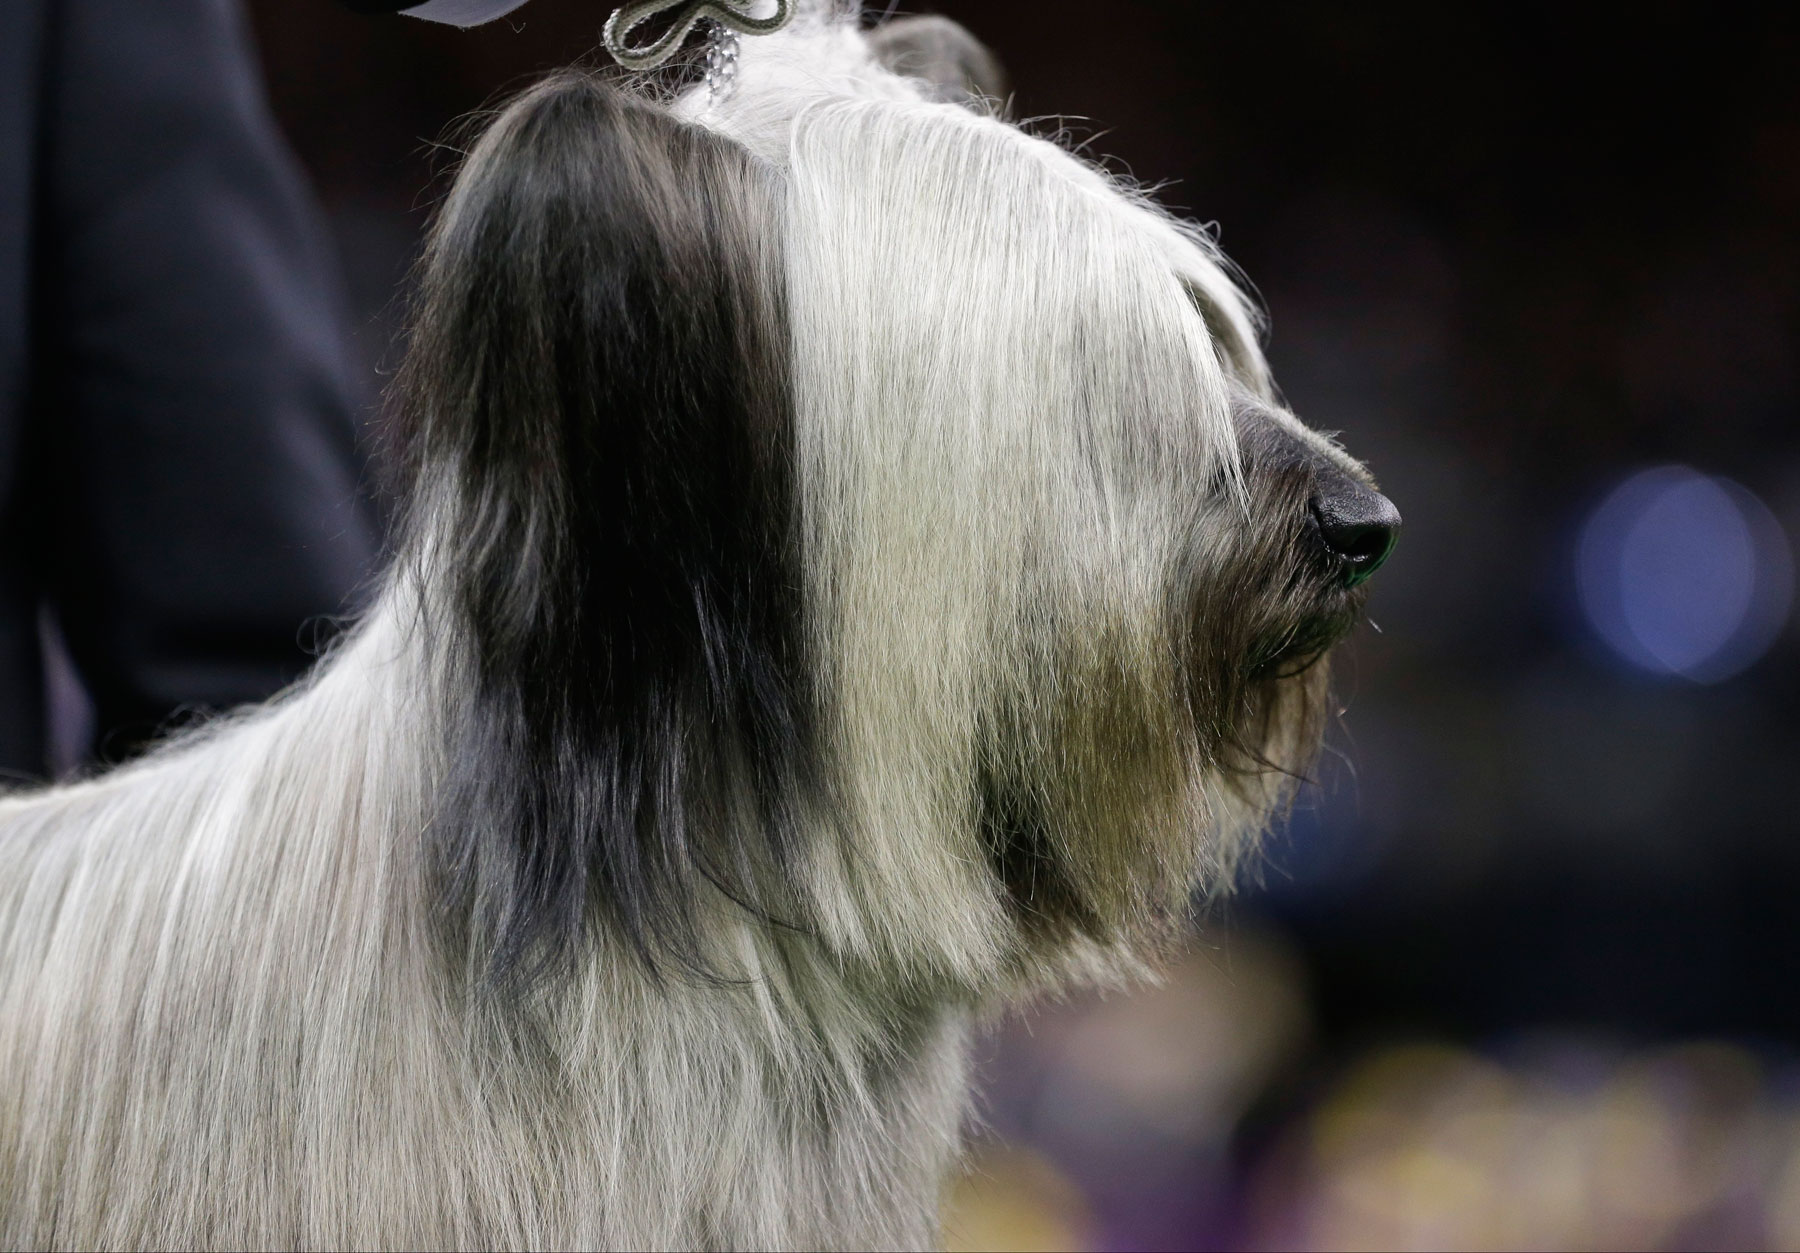 Charlie, a Skye terrier is judged in the terrier group at the Westminster Kennel Club dog show Tuesday, Feb. 17, 2015, in New York. (AP Photo/Frank Franklin II)